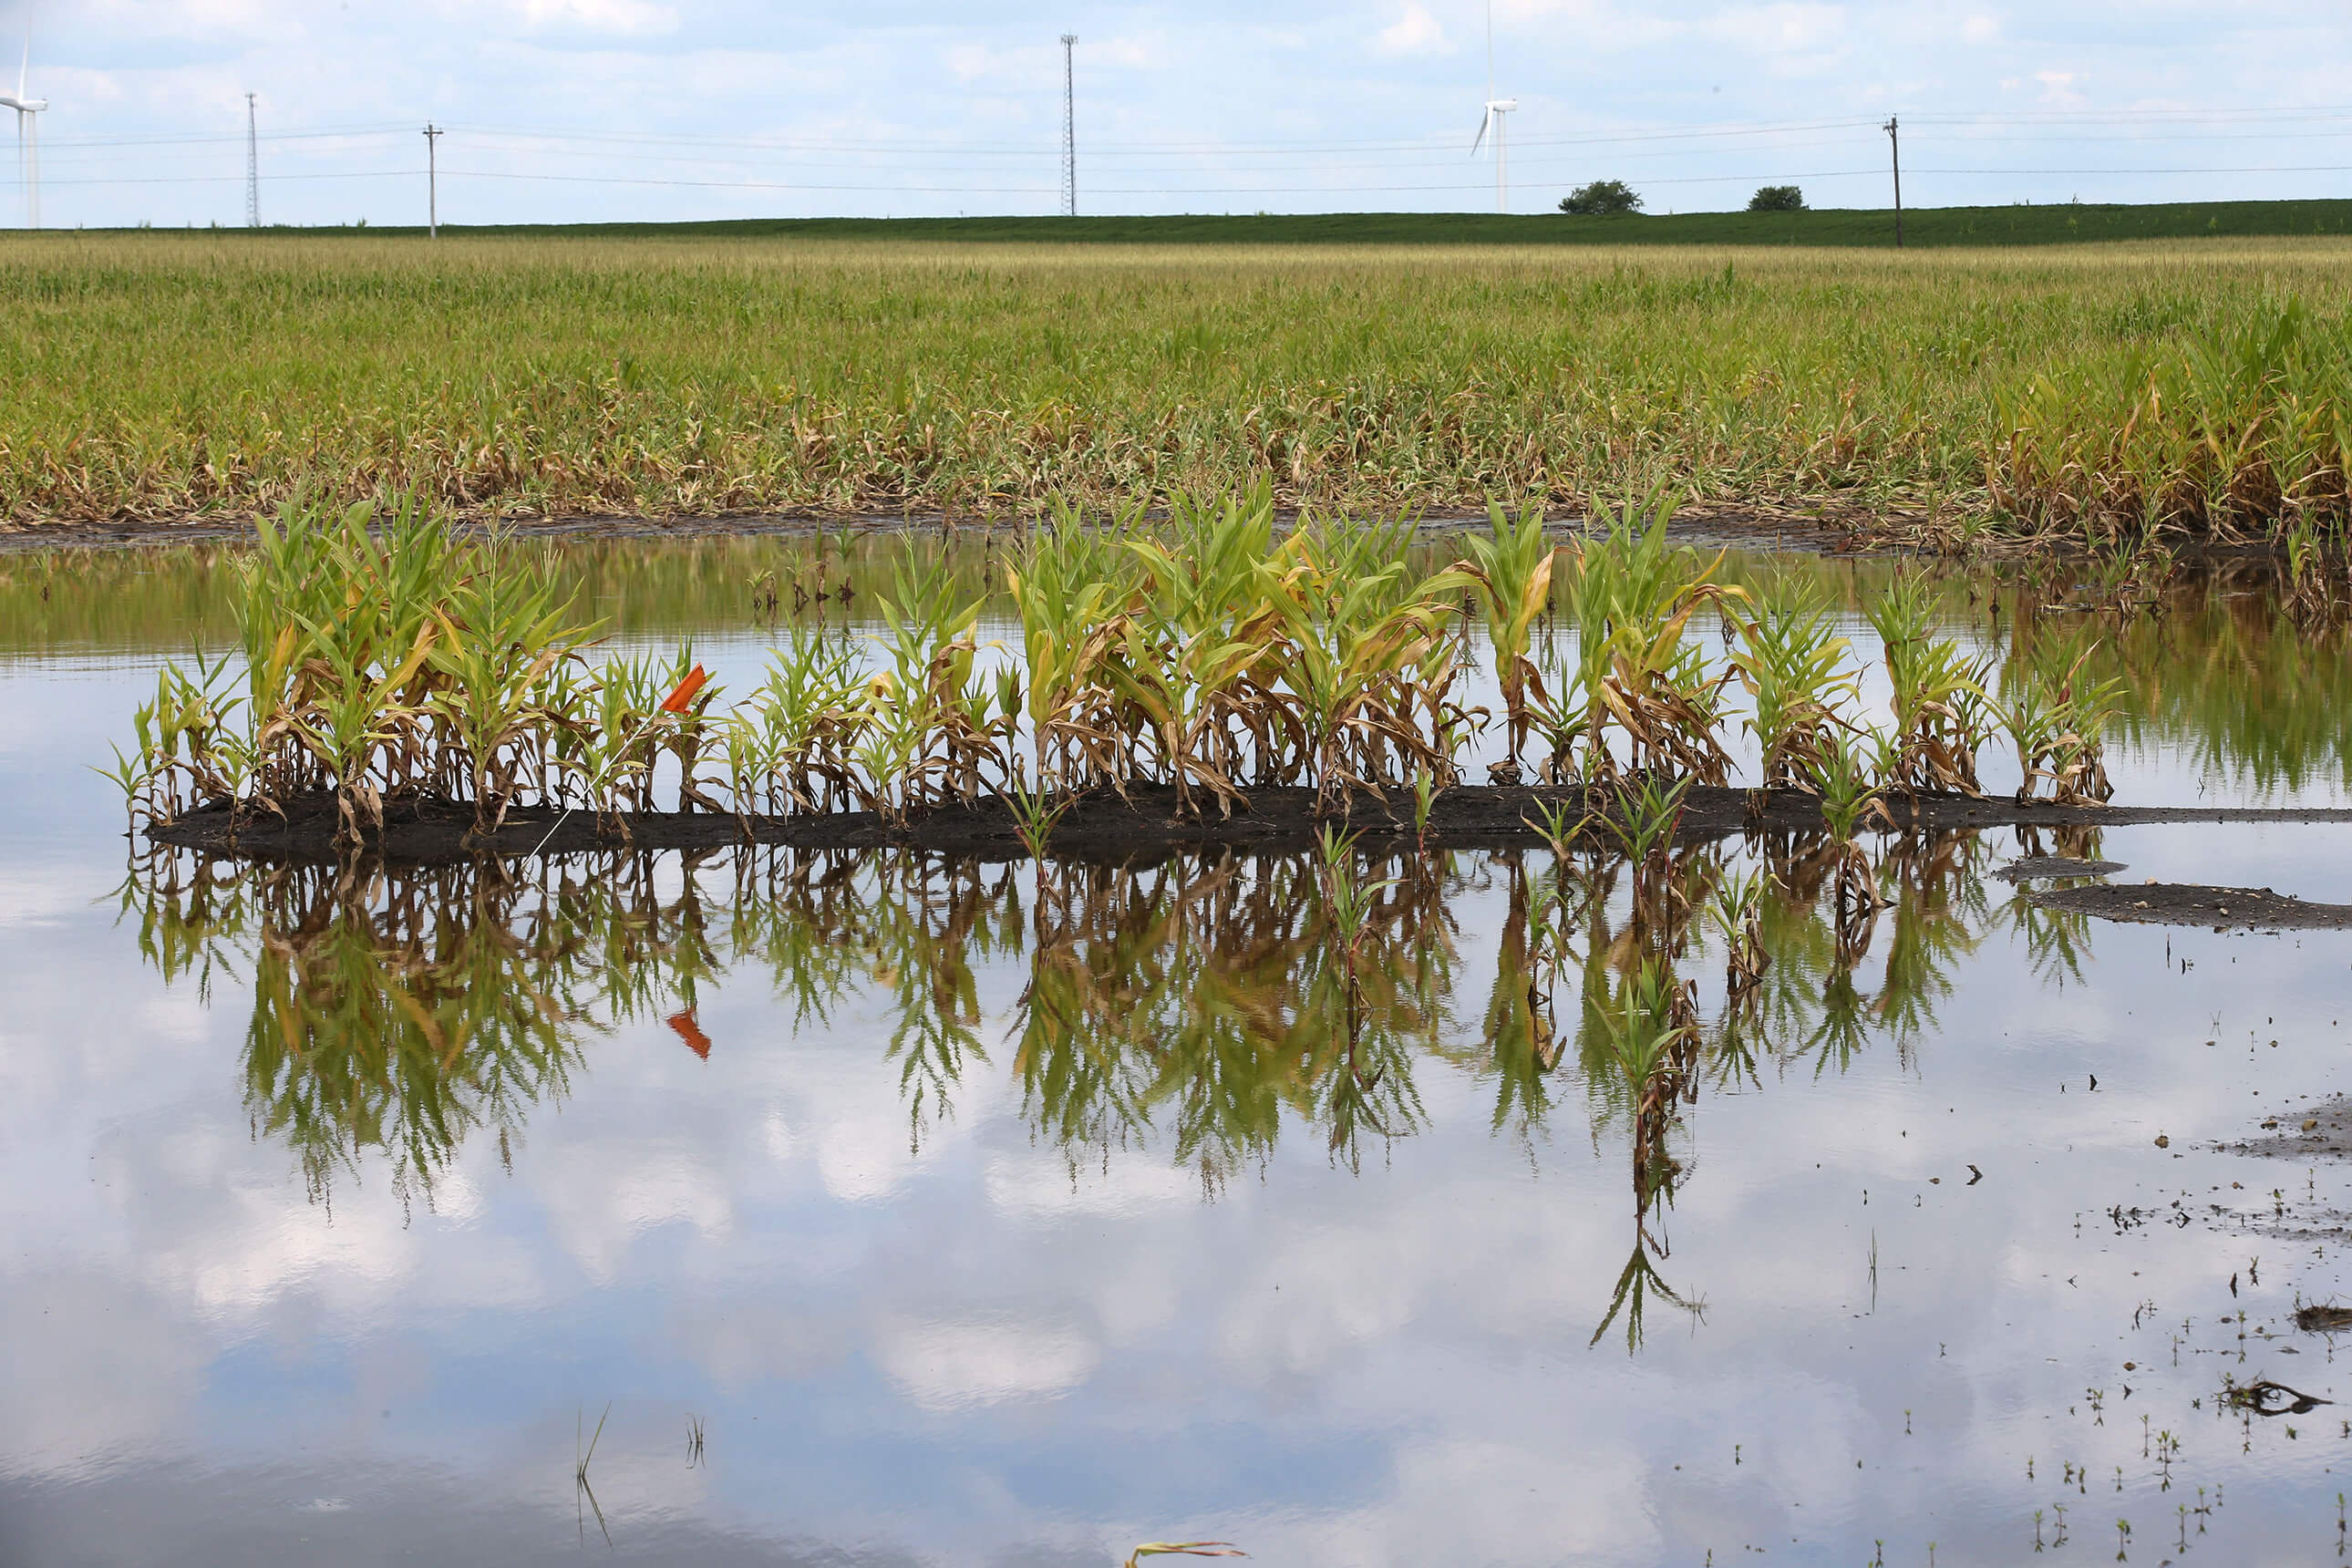 Heavy rains last spring caused flooding and ponding in many Indiana farm fields, but the crop largely recovered, providing some reason for optimism to Hoosier farmers facing similar soggy conditions this year. (Purdue Agricultural Communication photo/Tom Campbell) 